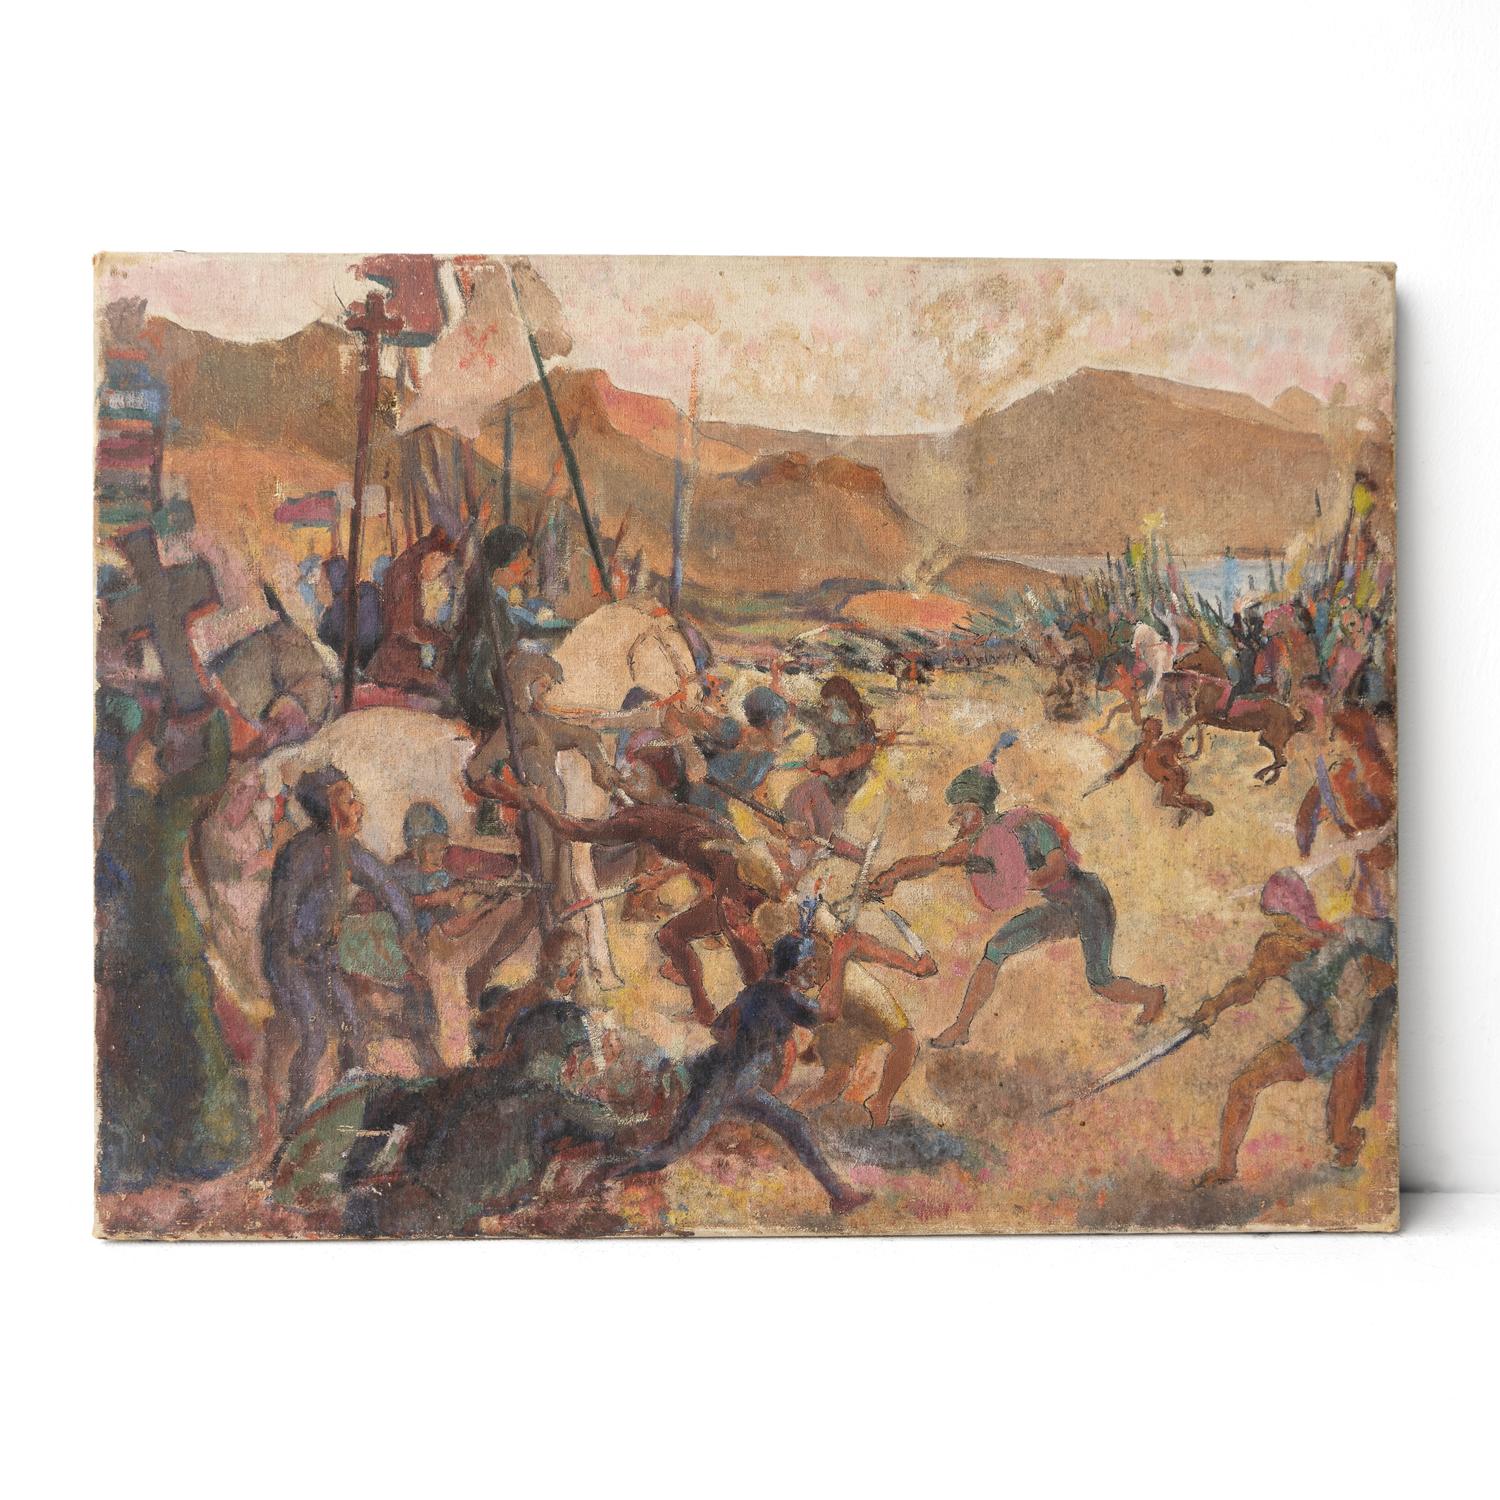 Antique Original Oil on Canvas Painting 

A wonderfully energetic depiction of an Eastern battle scene, probably depicting the medieval Crusades including knights on horseback, pikemen and warriors in turbans.

Painted in a loose, free style that